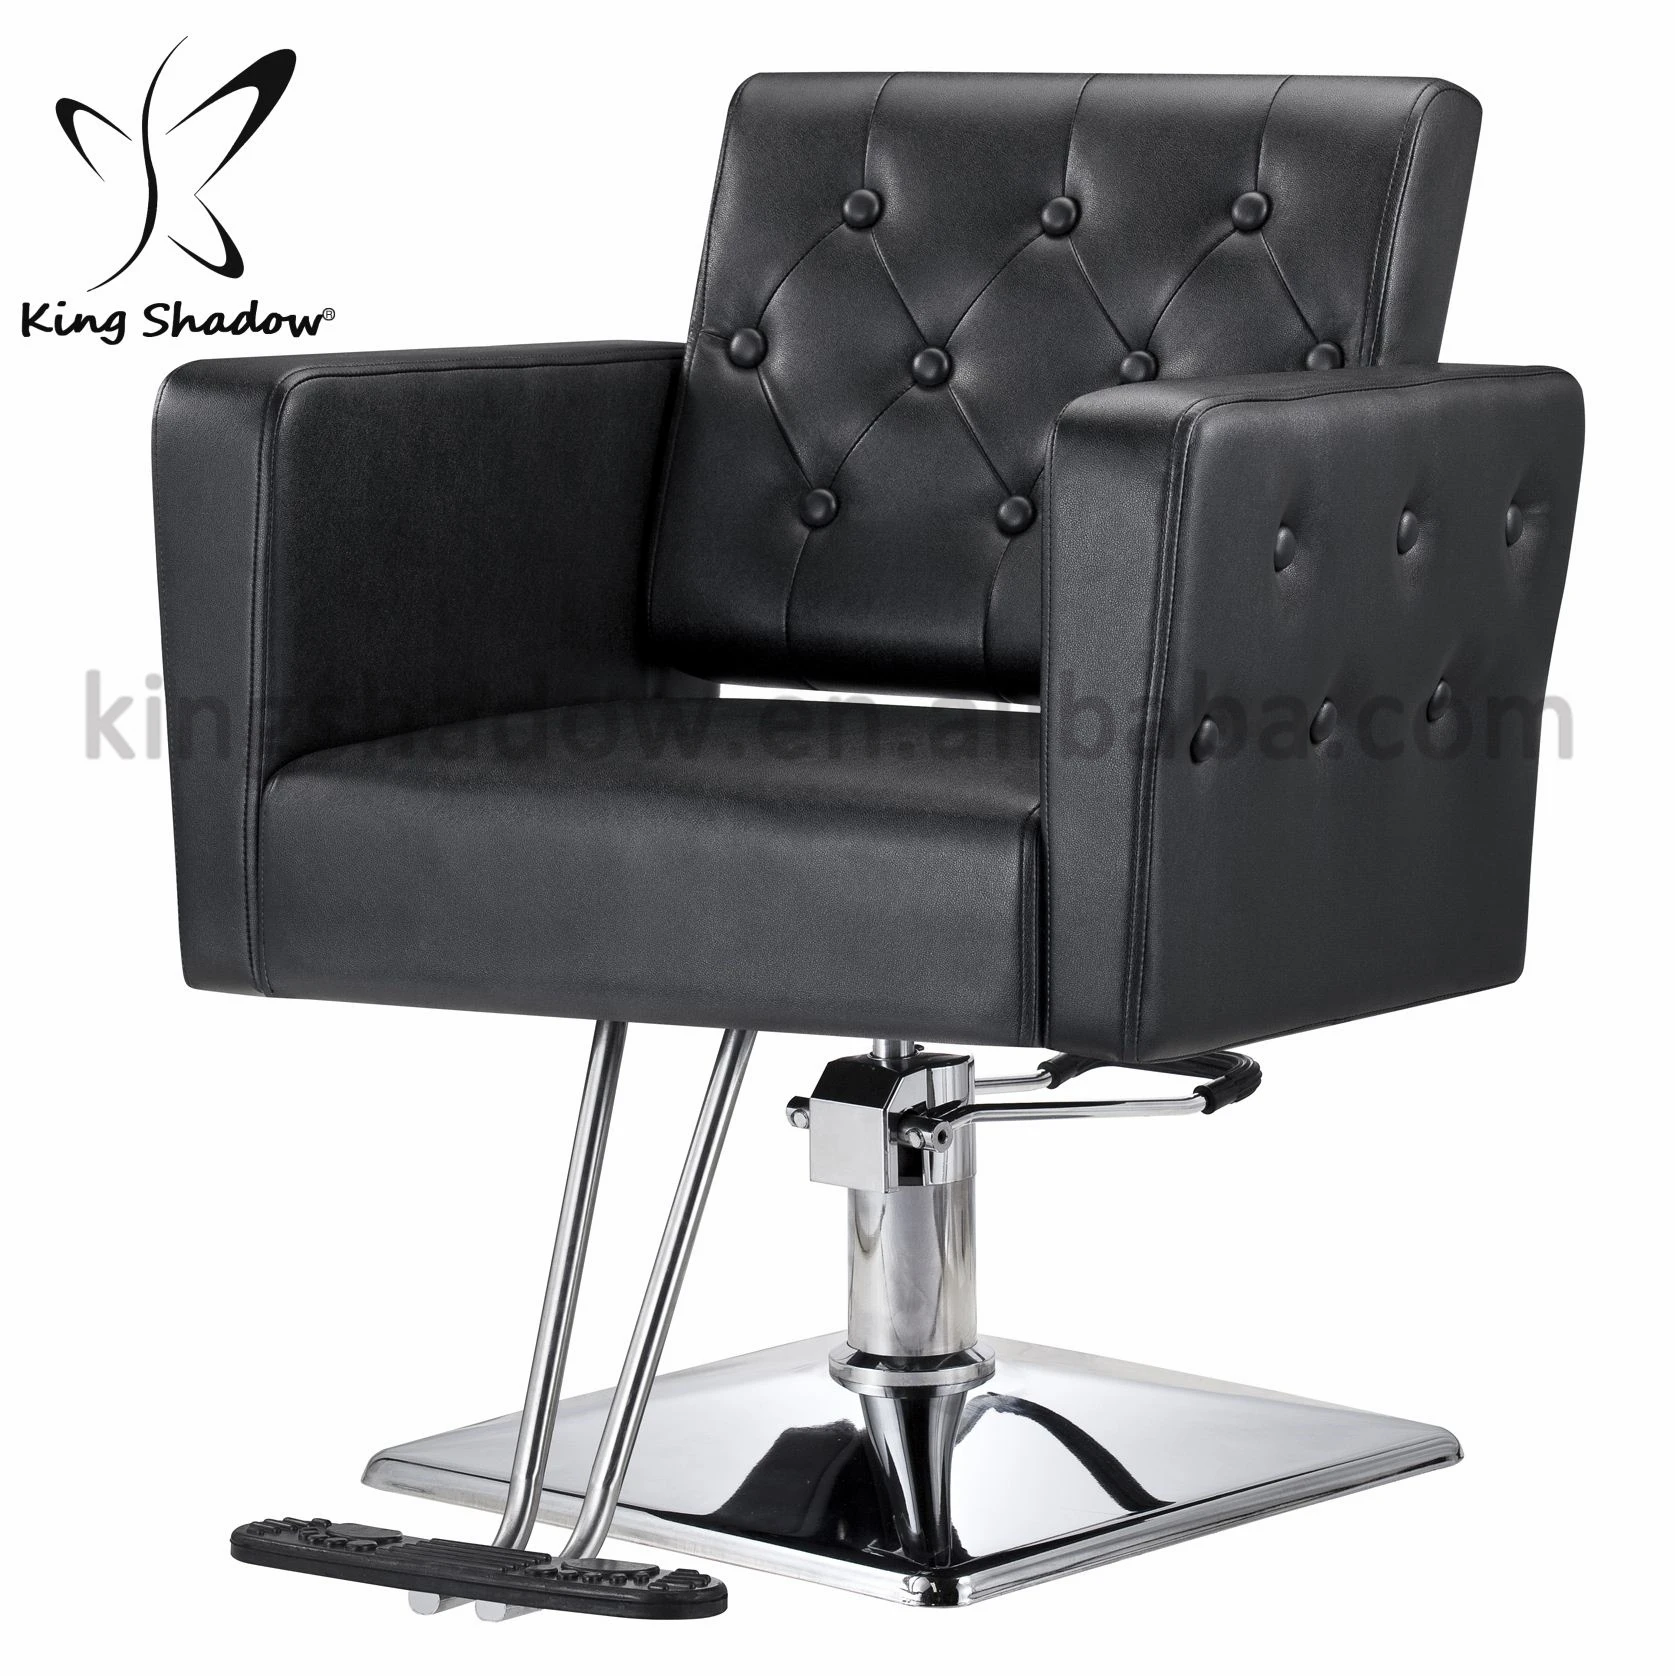 New Salon Chairs Classic Chairs Styling Chair For Salon - Buy Styling